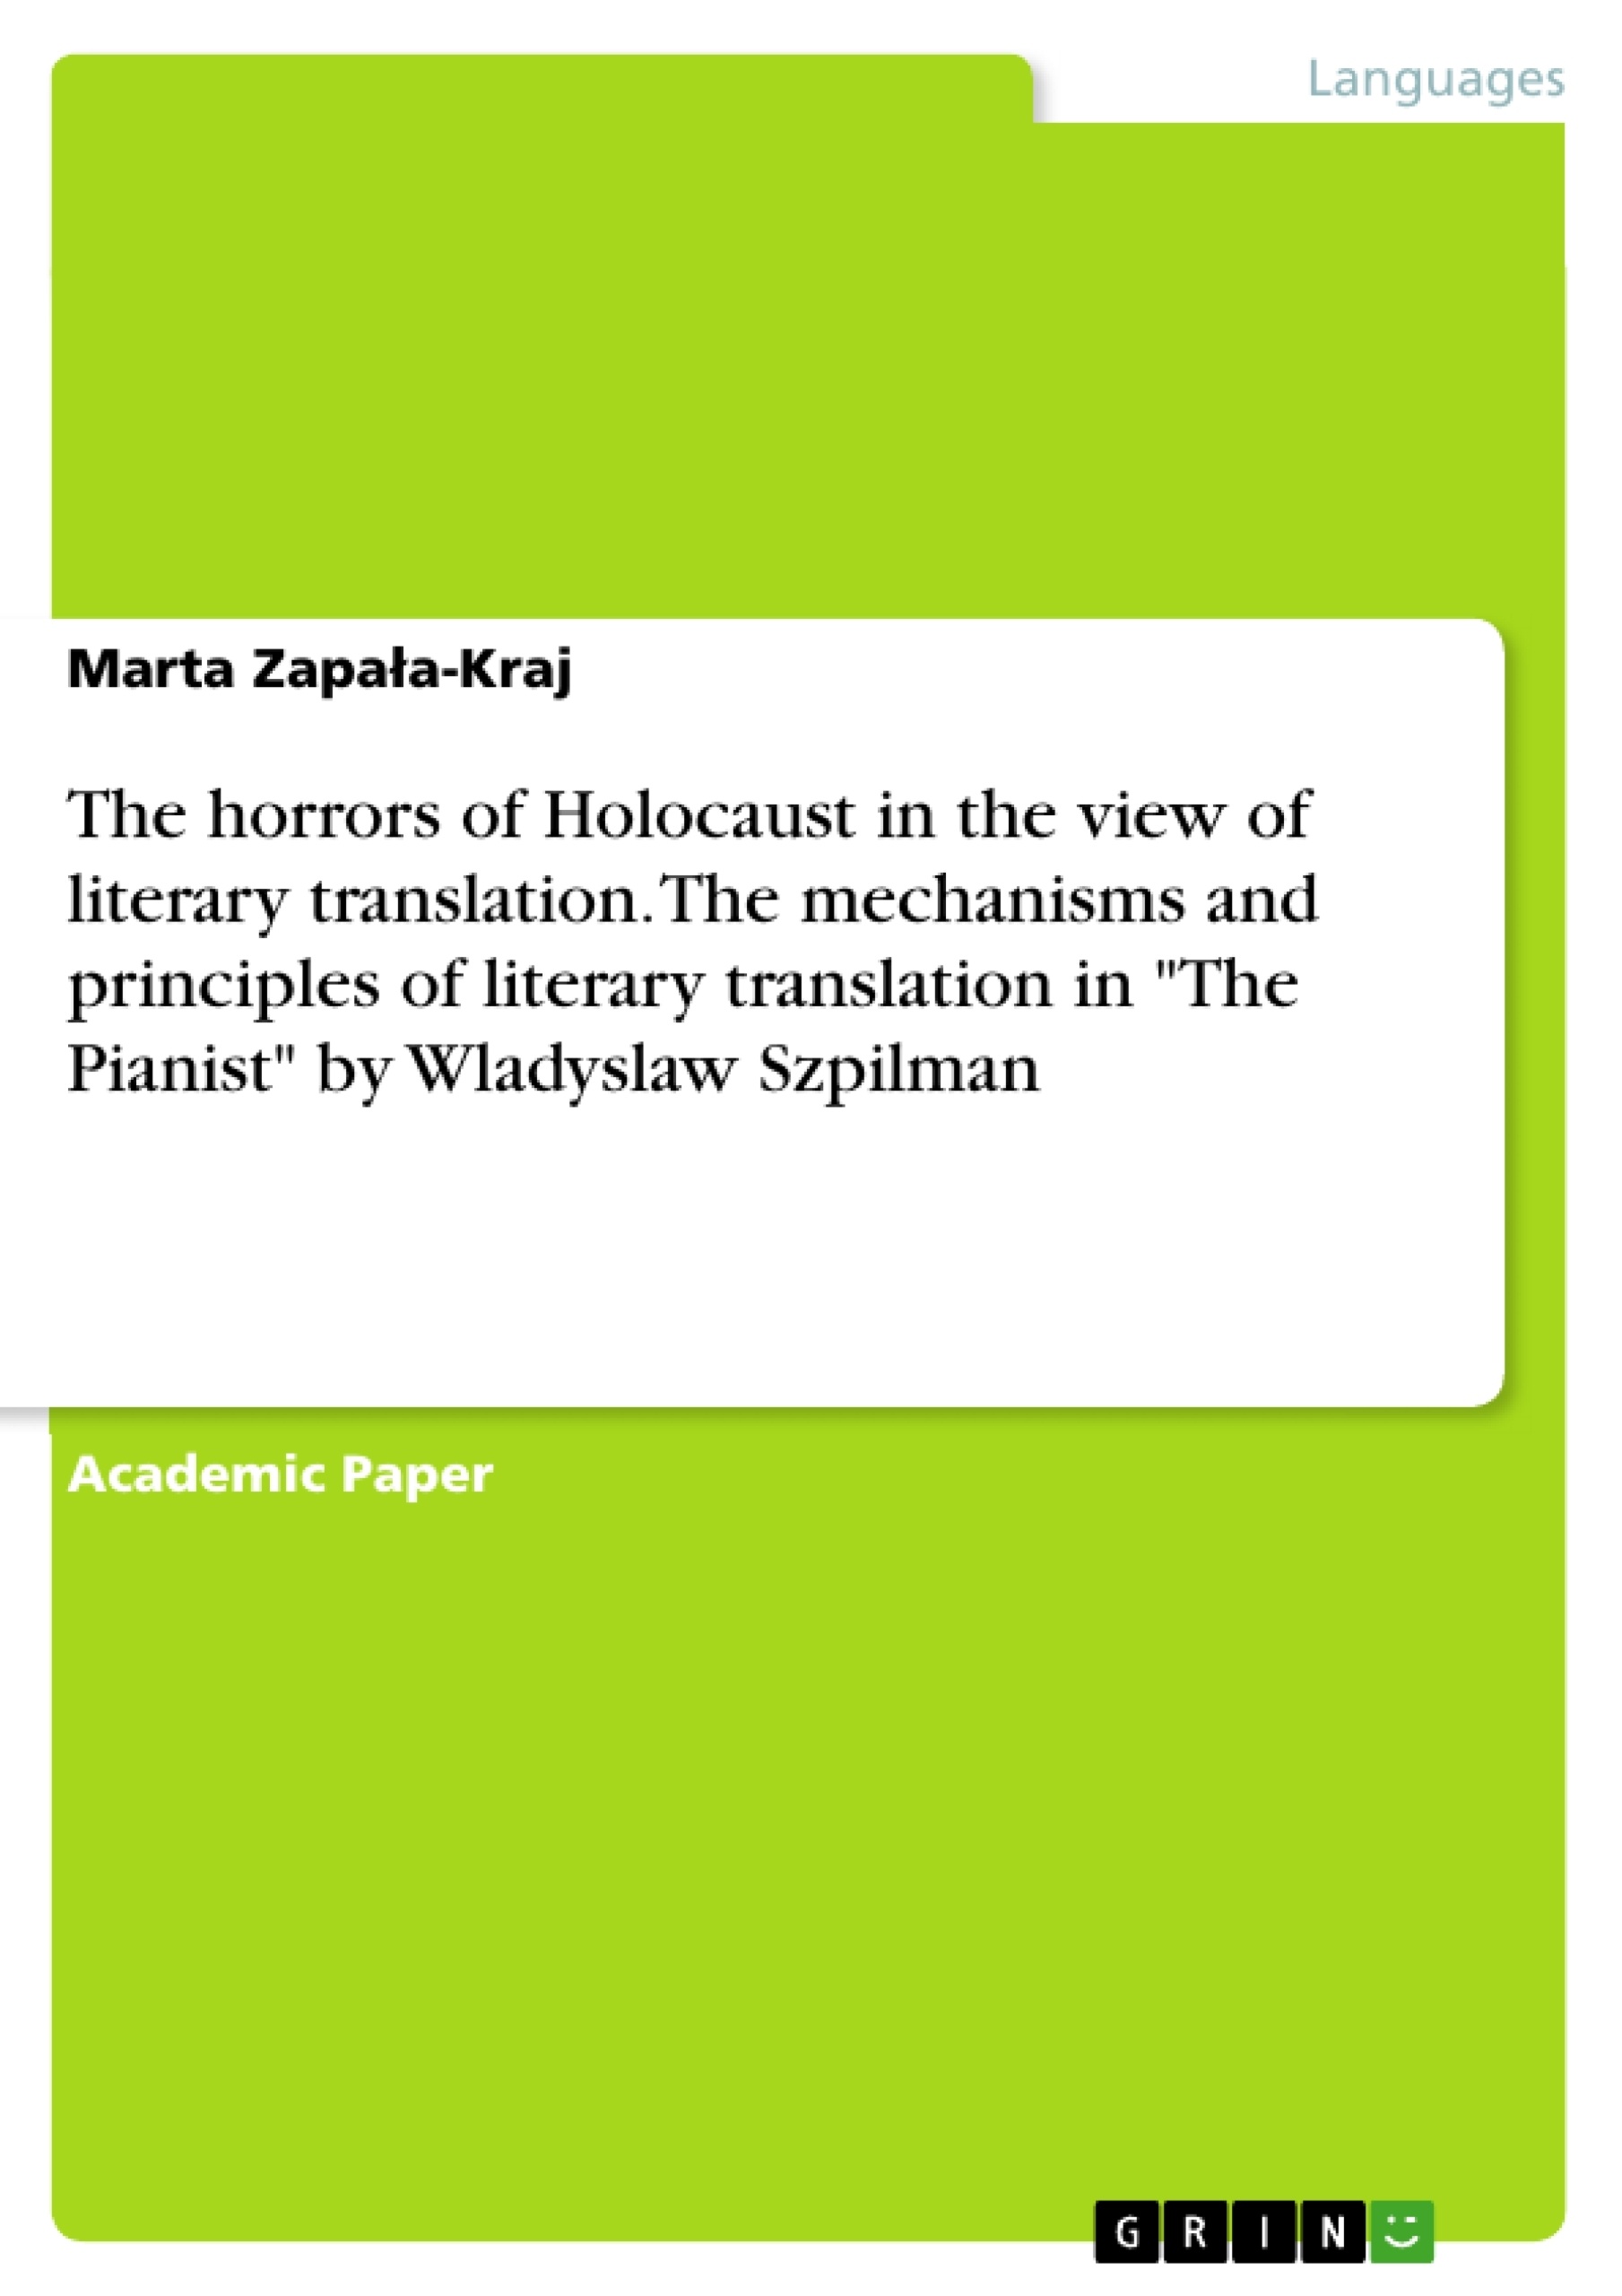 Titre: The horrors of Holocaust in the view of literary translation. The mechanisms and principles of literary translation in "The Pianist" by Wladyslaw Szpilman